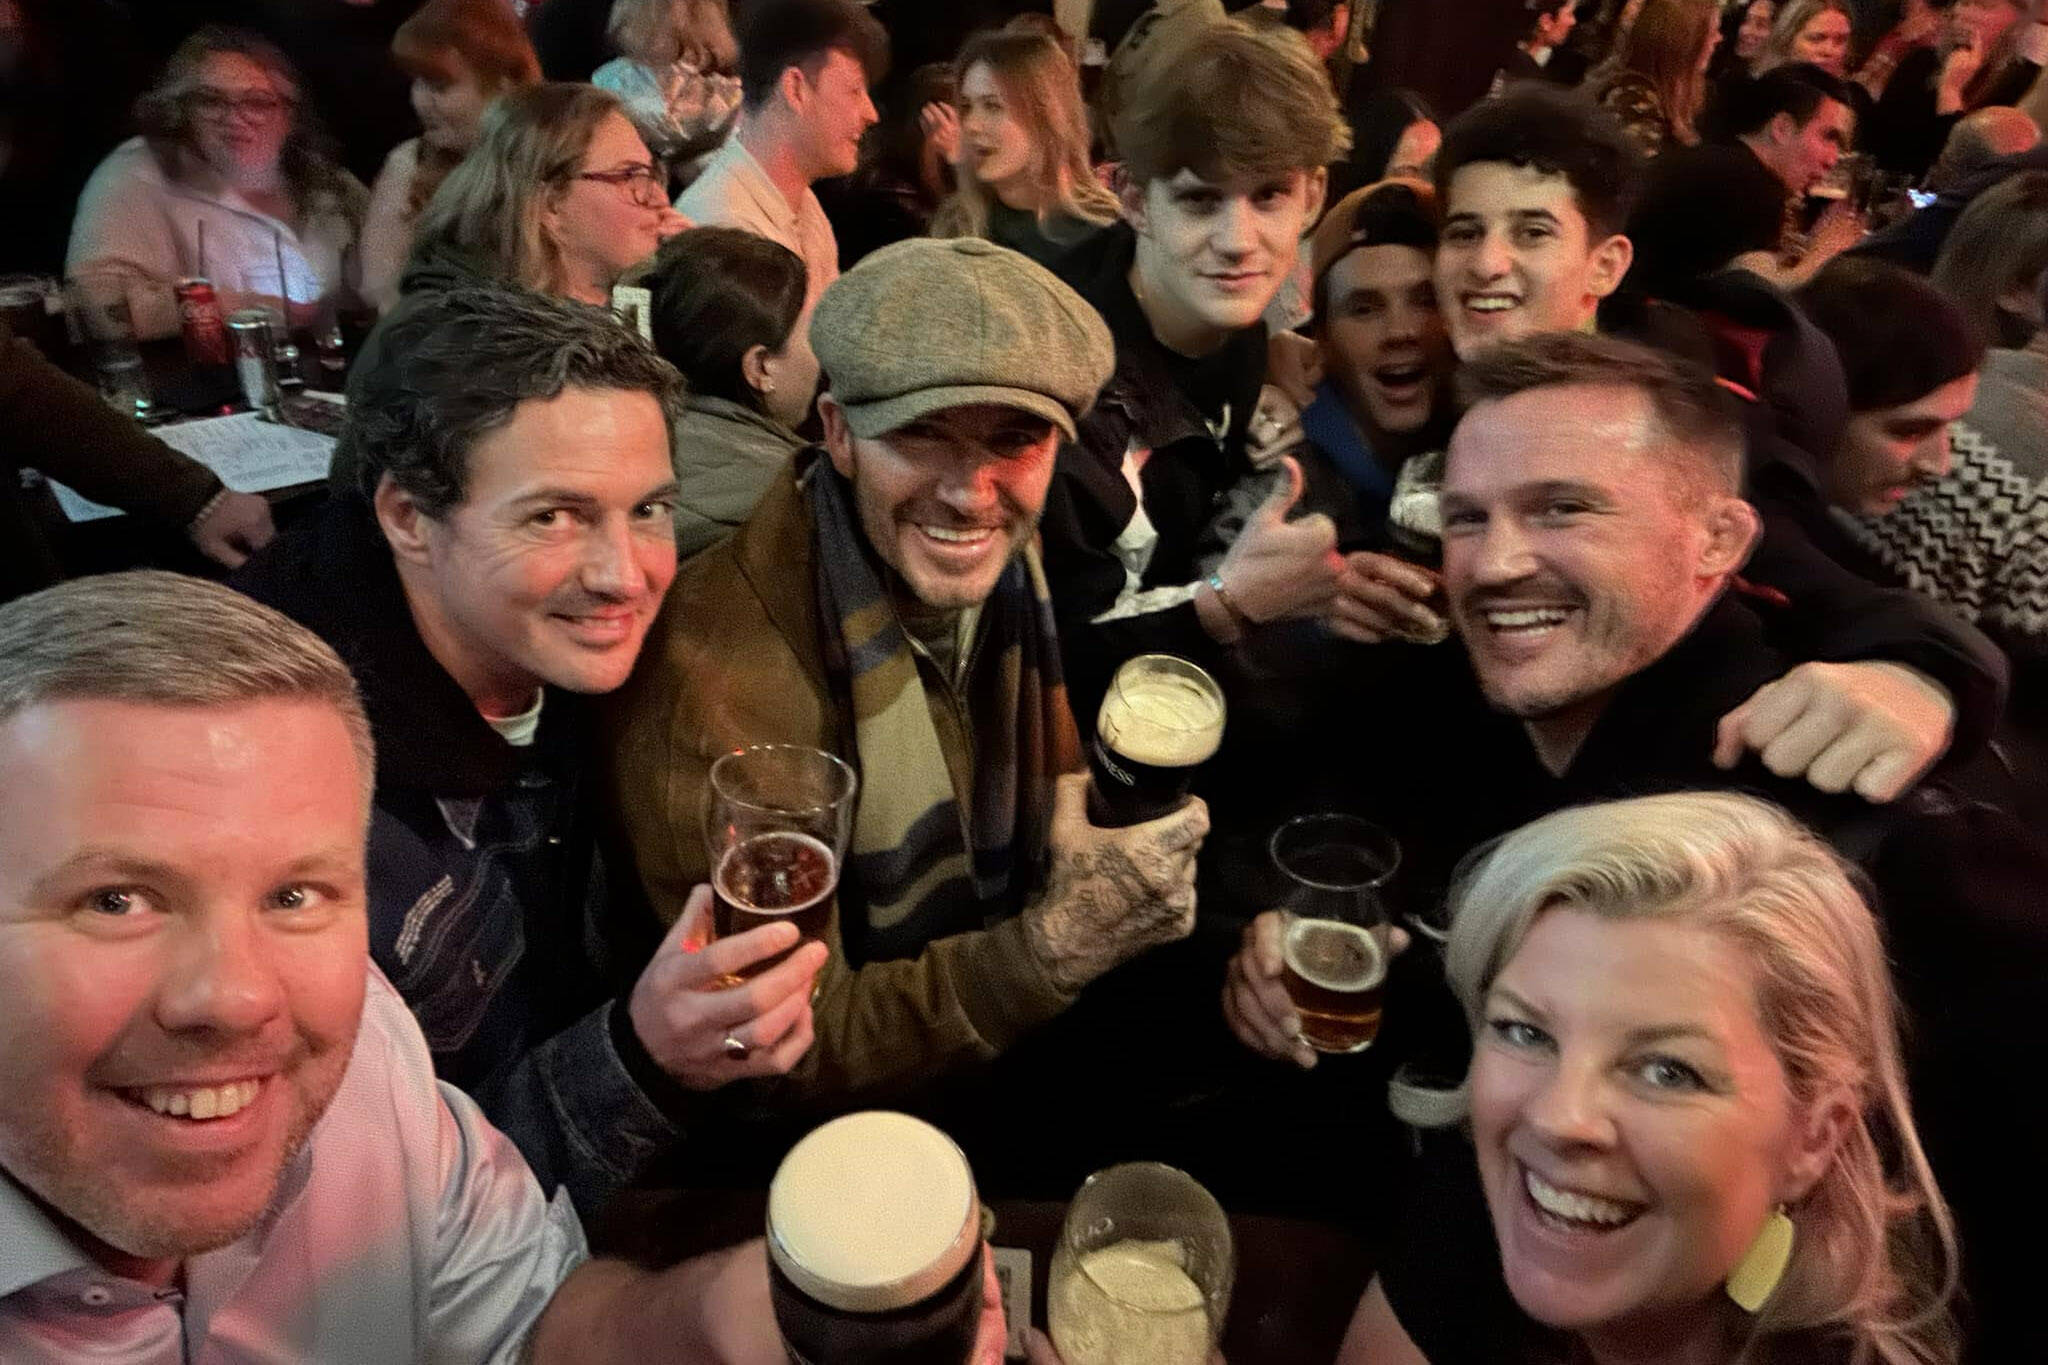 Two North Shore business owners, Trish Neufeld and her brother David Smyth (at bottom, right and left), were given a night to remember when they bumped into David Beckham and his son at a pub in Dublin. (David Smyth/ Facebook)